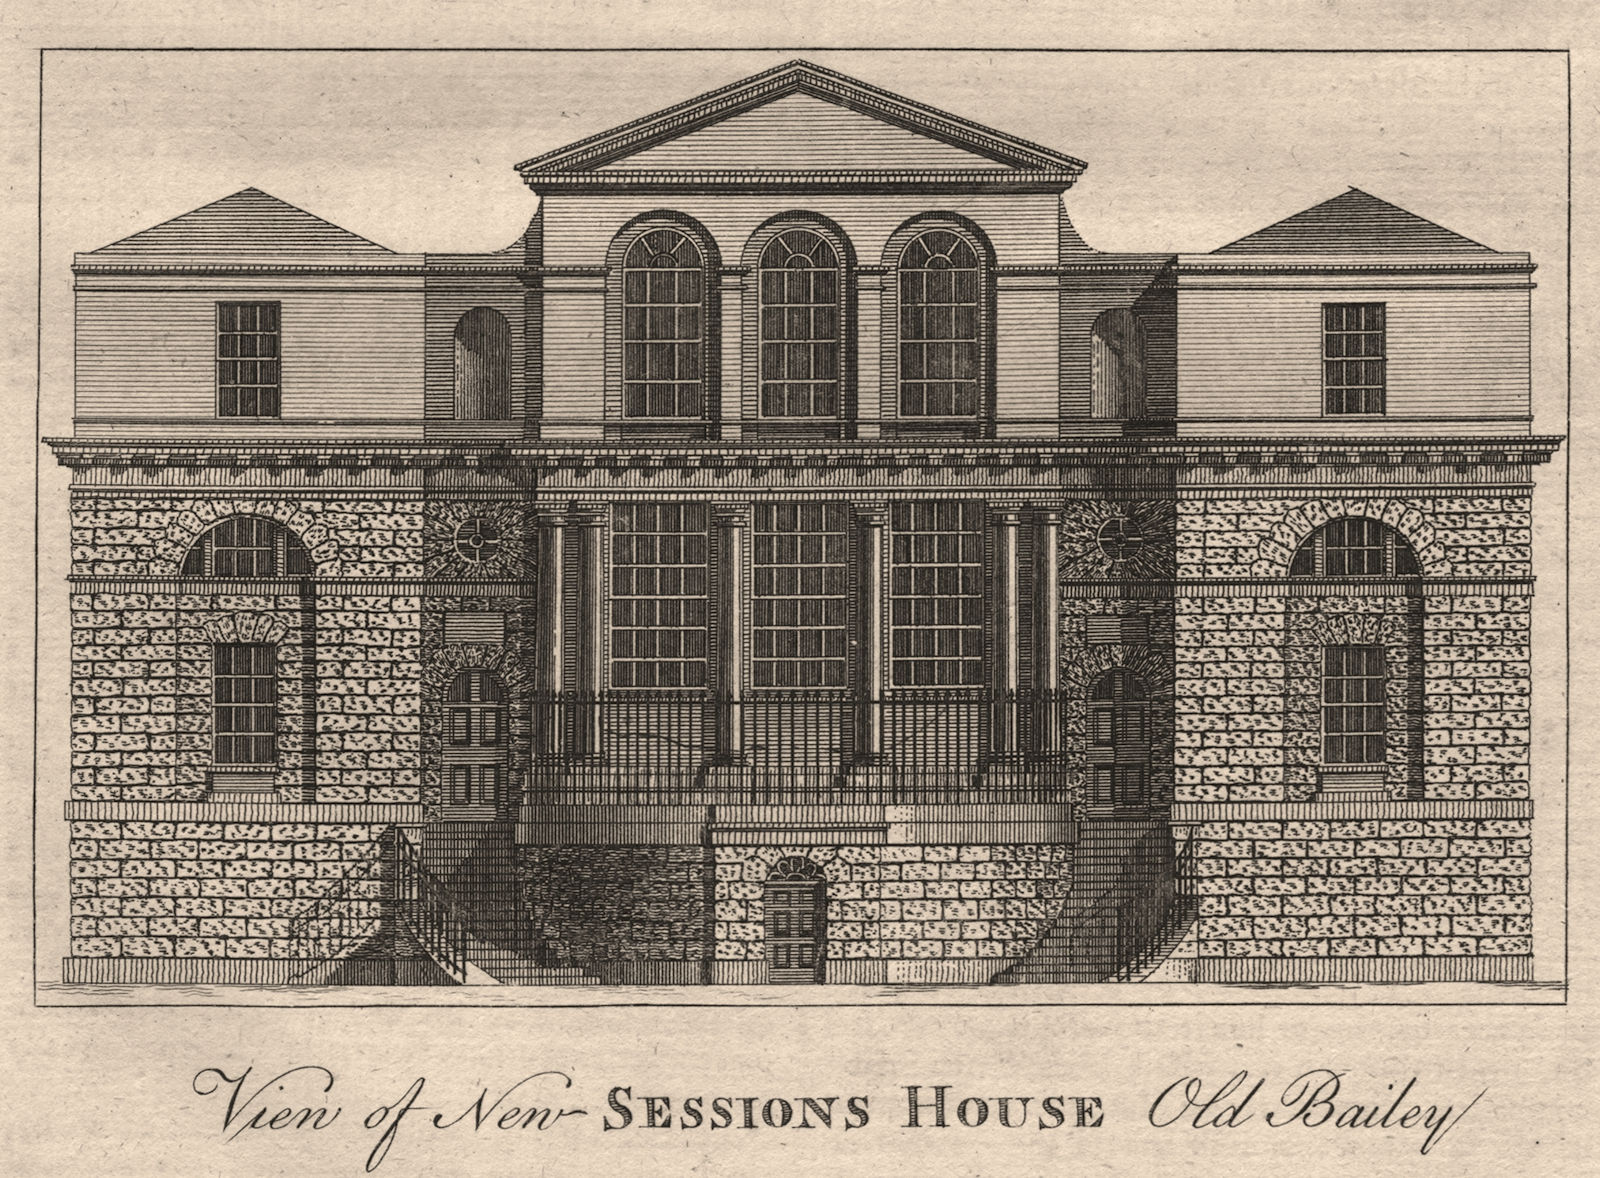 "View of New Sessions House, Old Bailey", London. HARRISON 1776 print